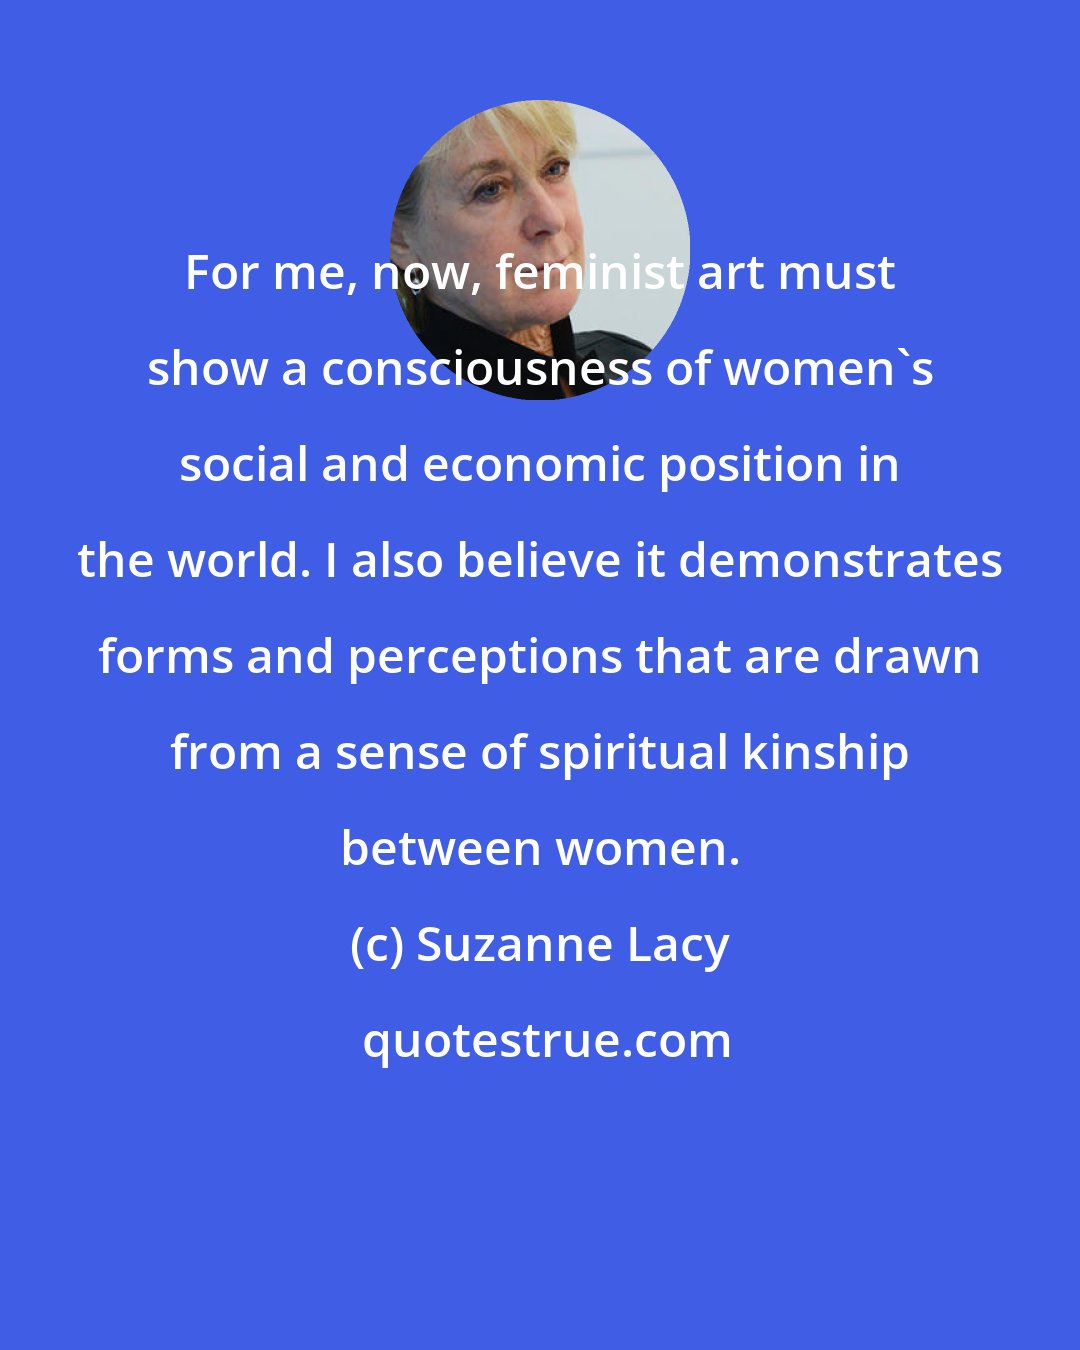 Suzanne Lacy: For me, now, feminist art must show a consciousness of women's social and economic position in the world. I also believe it demonstrates forms and perceptions that are drawn from a sense of spiritual kinship between women.